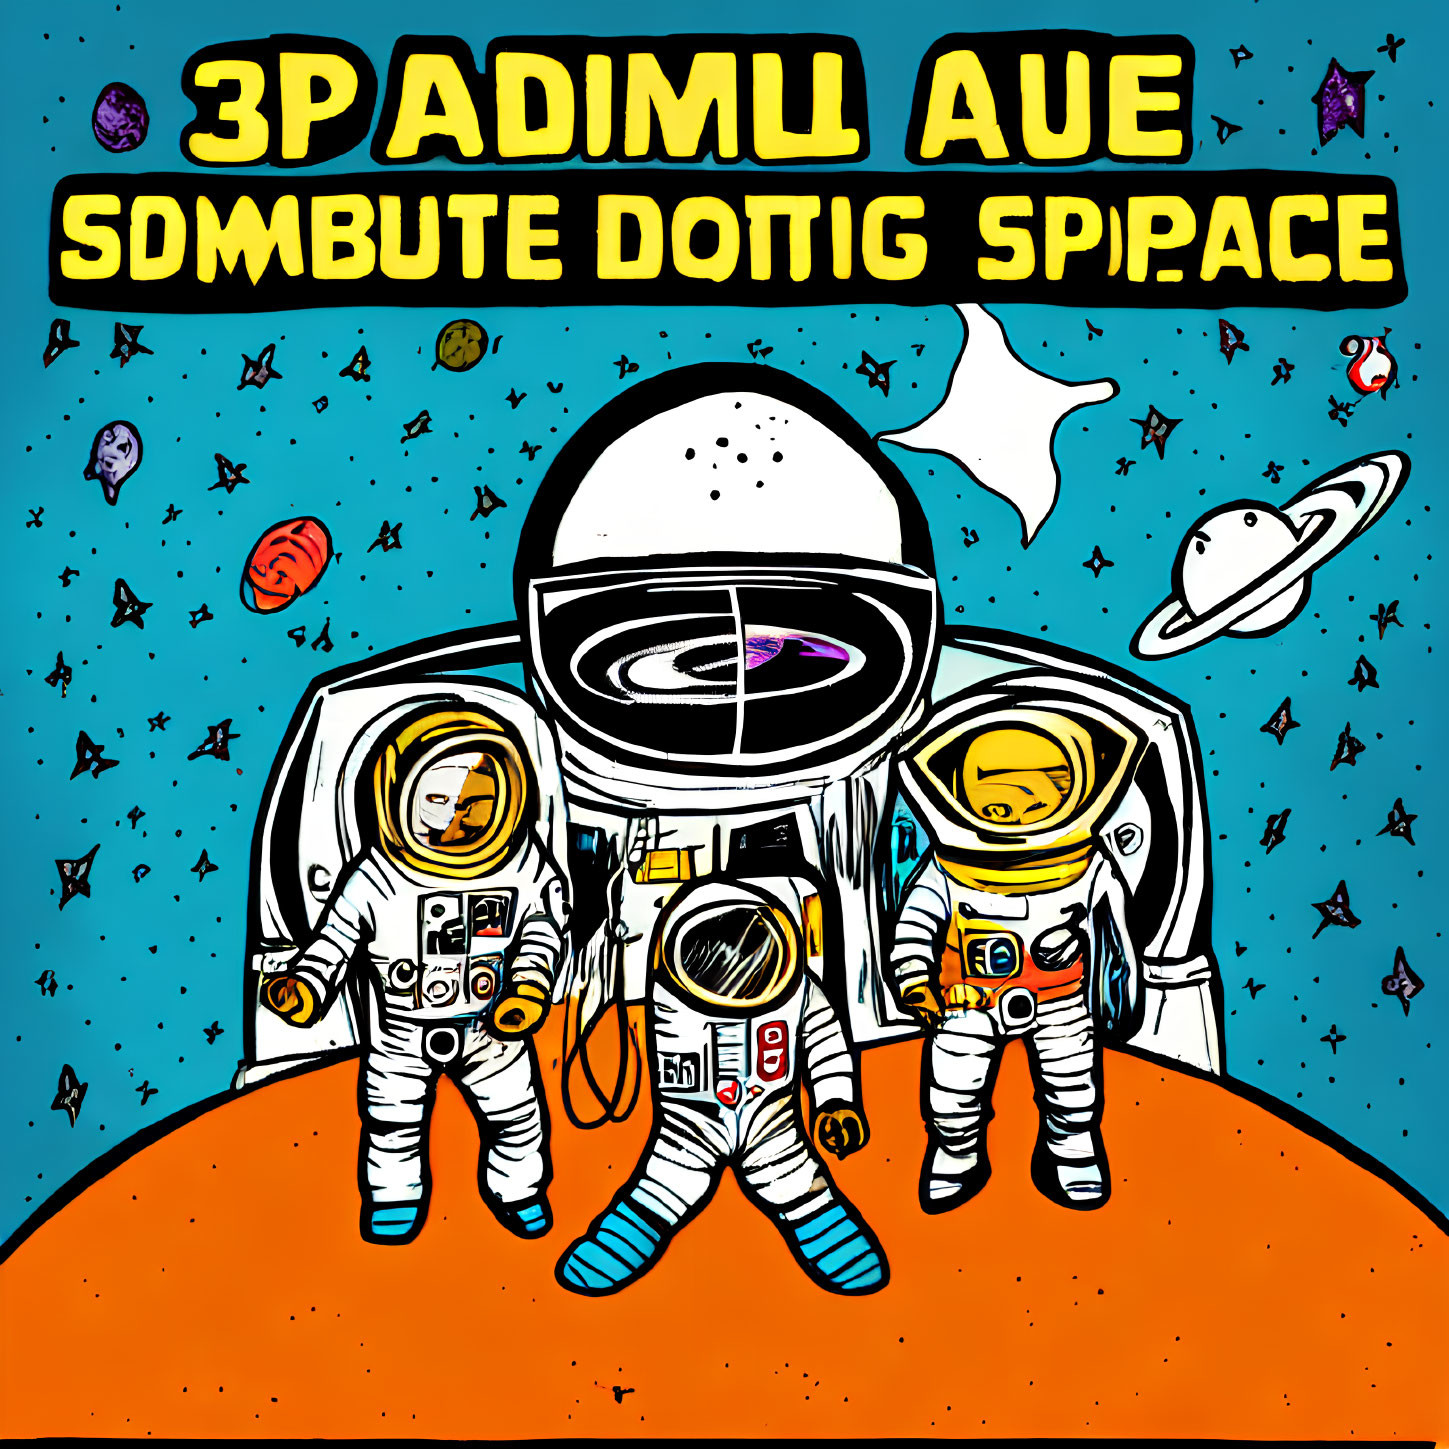 Astronauts on orange planet with large alien and space backdrop